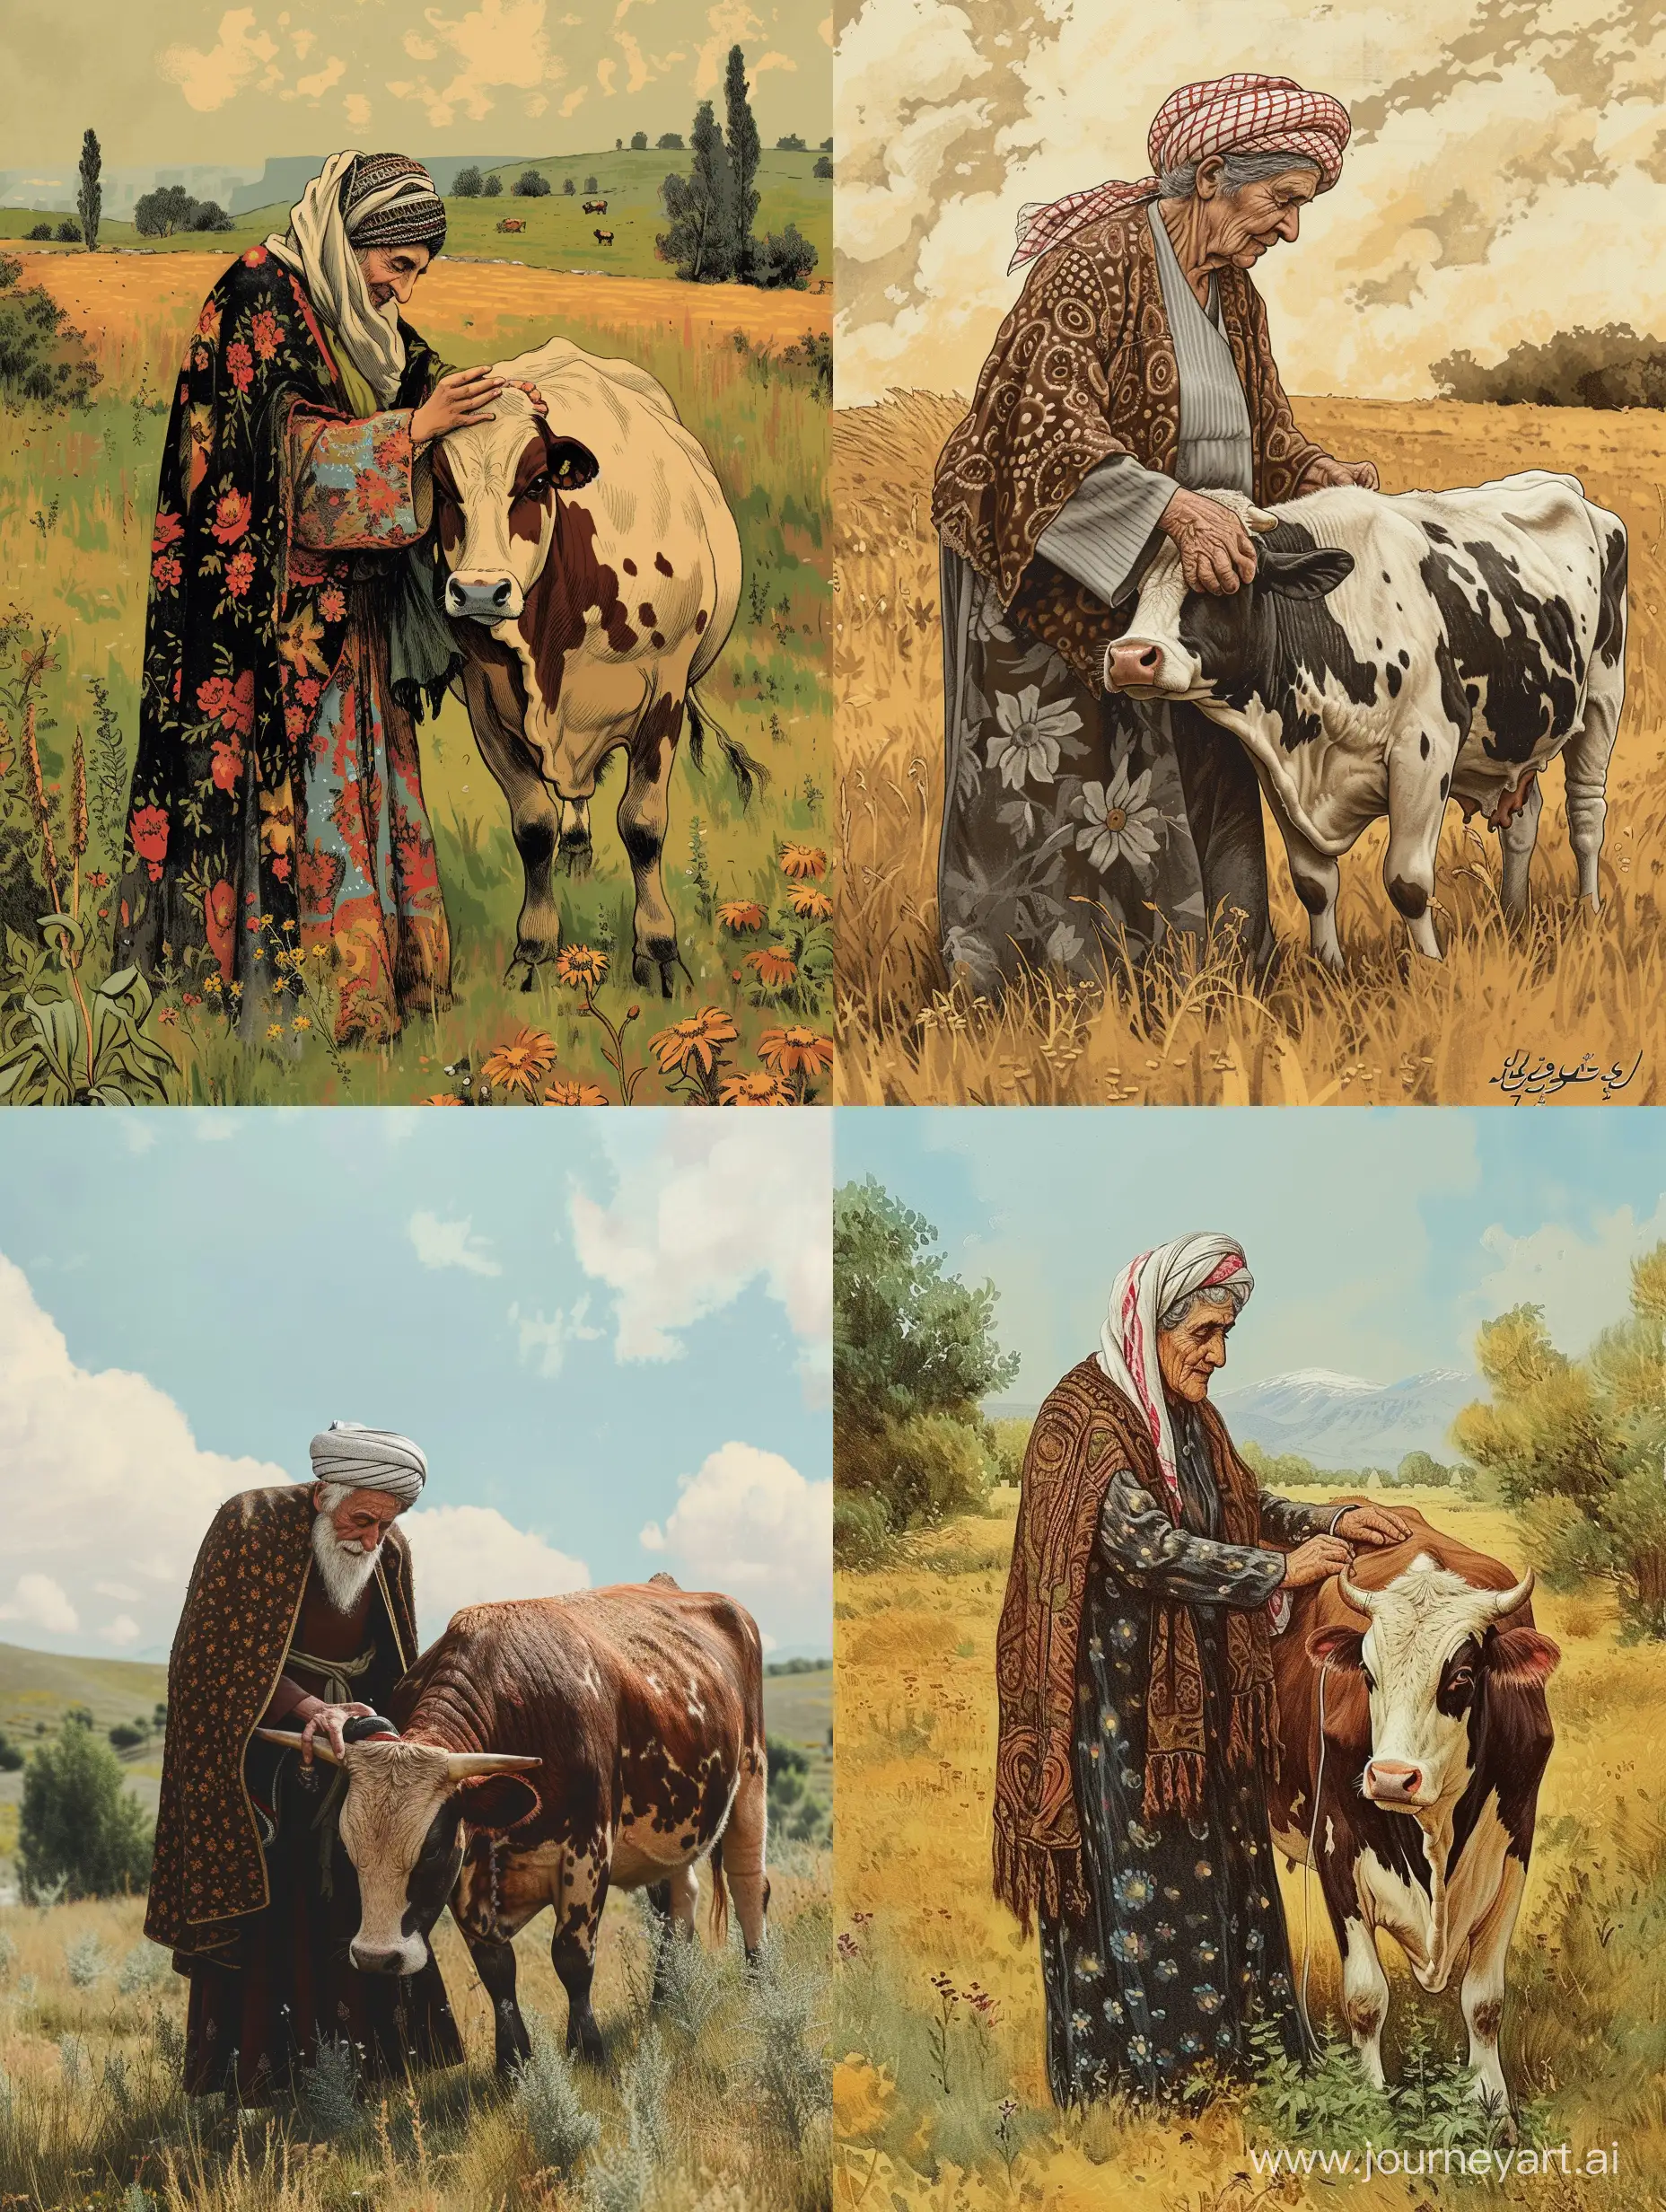 an iranian old woman in traditional clothing milking a fatter cow in the middle of a field in old style illustration, detailed, cs 5:7

 